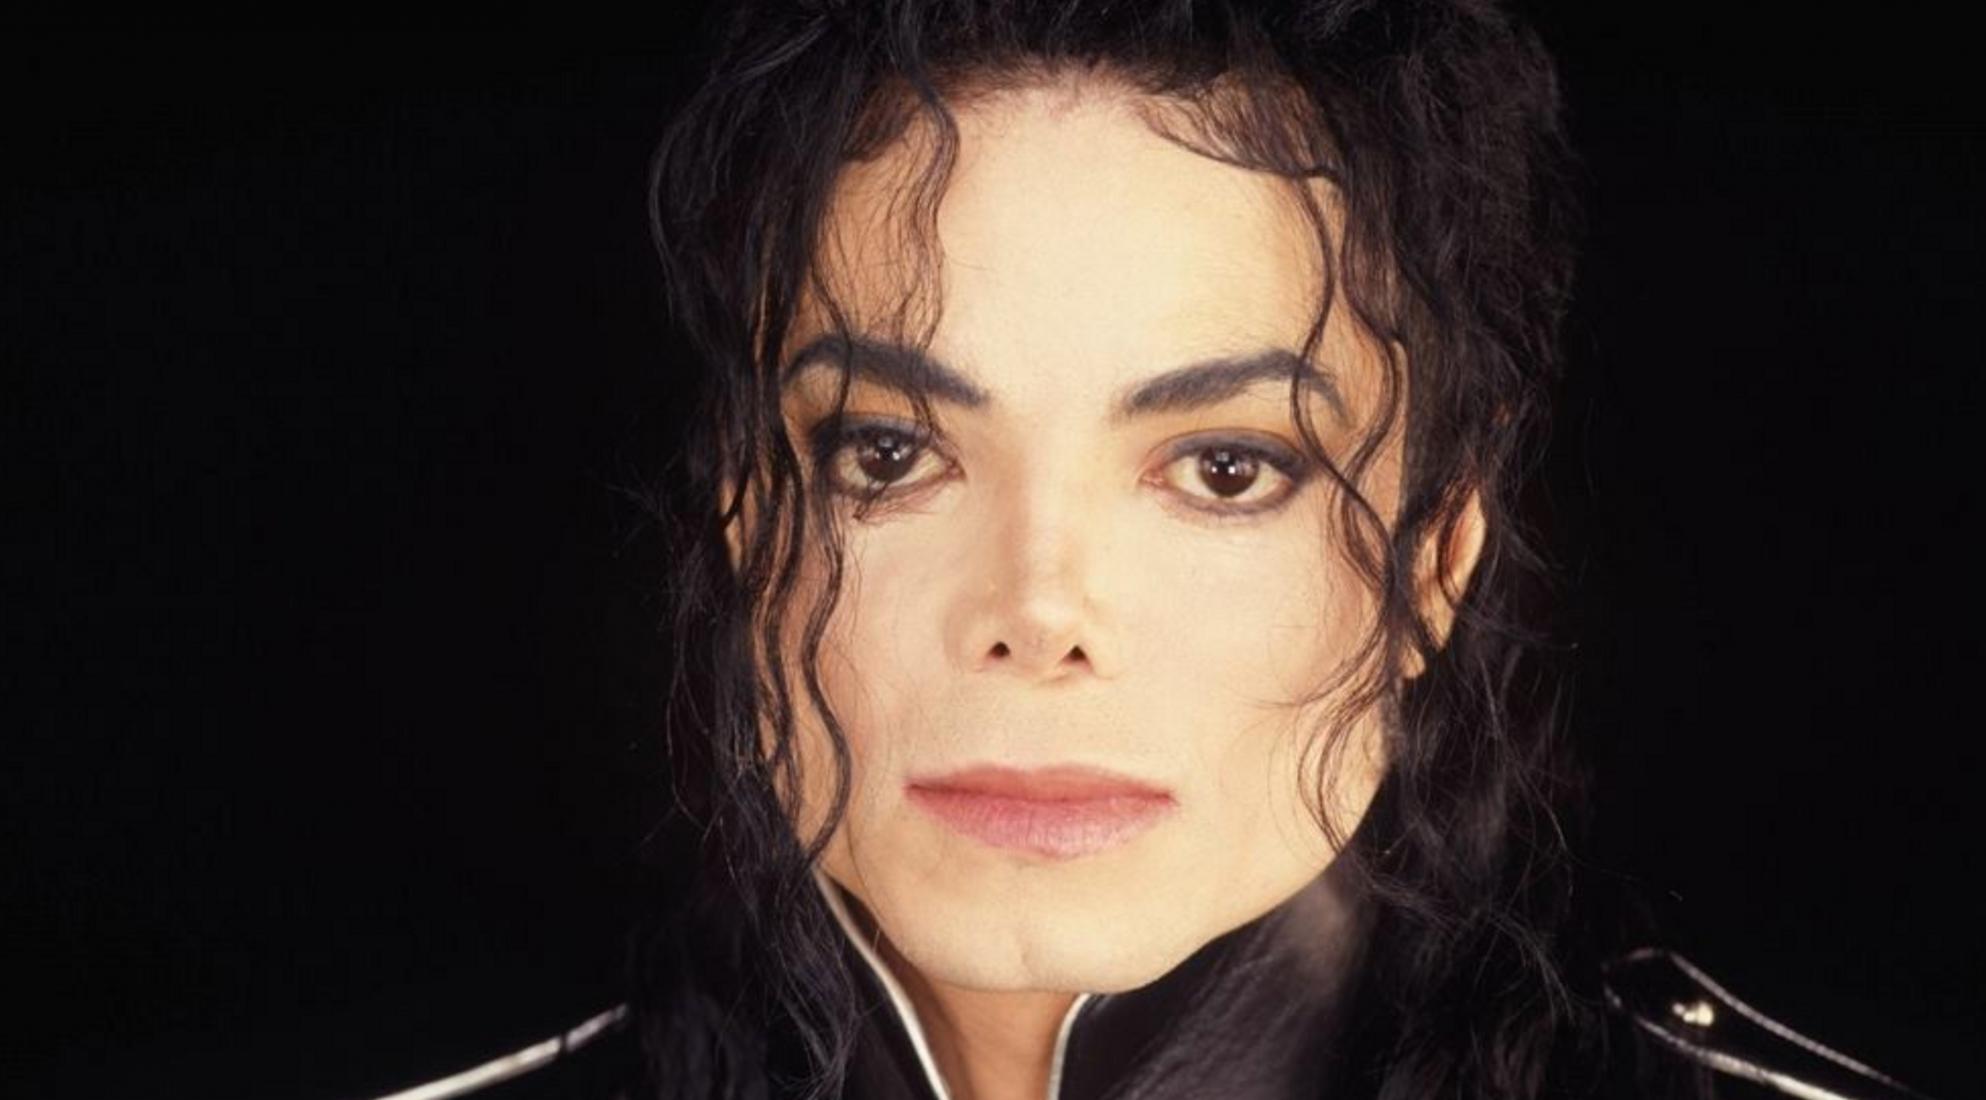 After Death, Michael Jackson Is Earning More Than He Was Alive